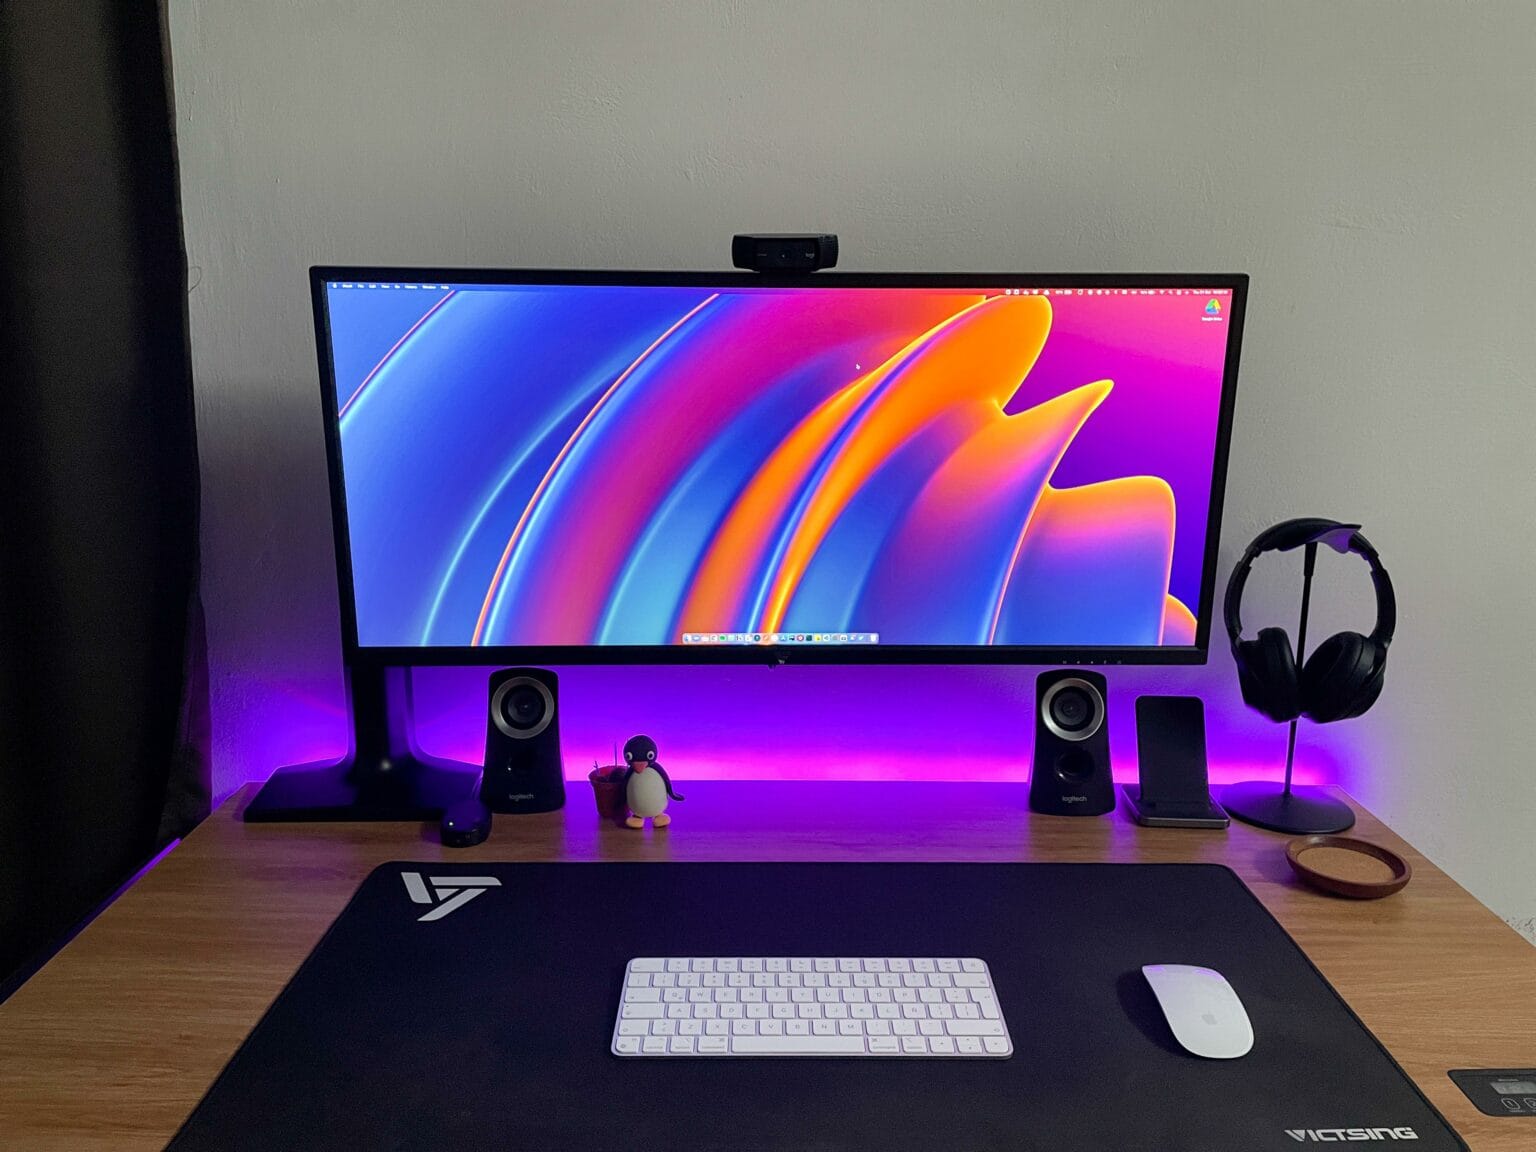 Fine setup, but where did you get that wallpaper?